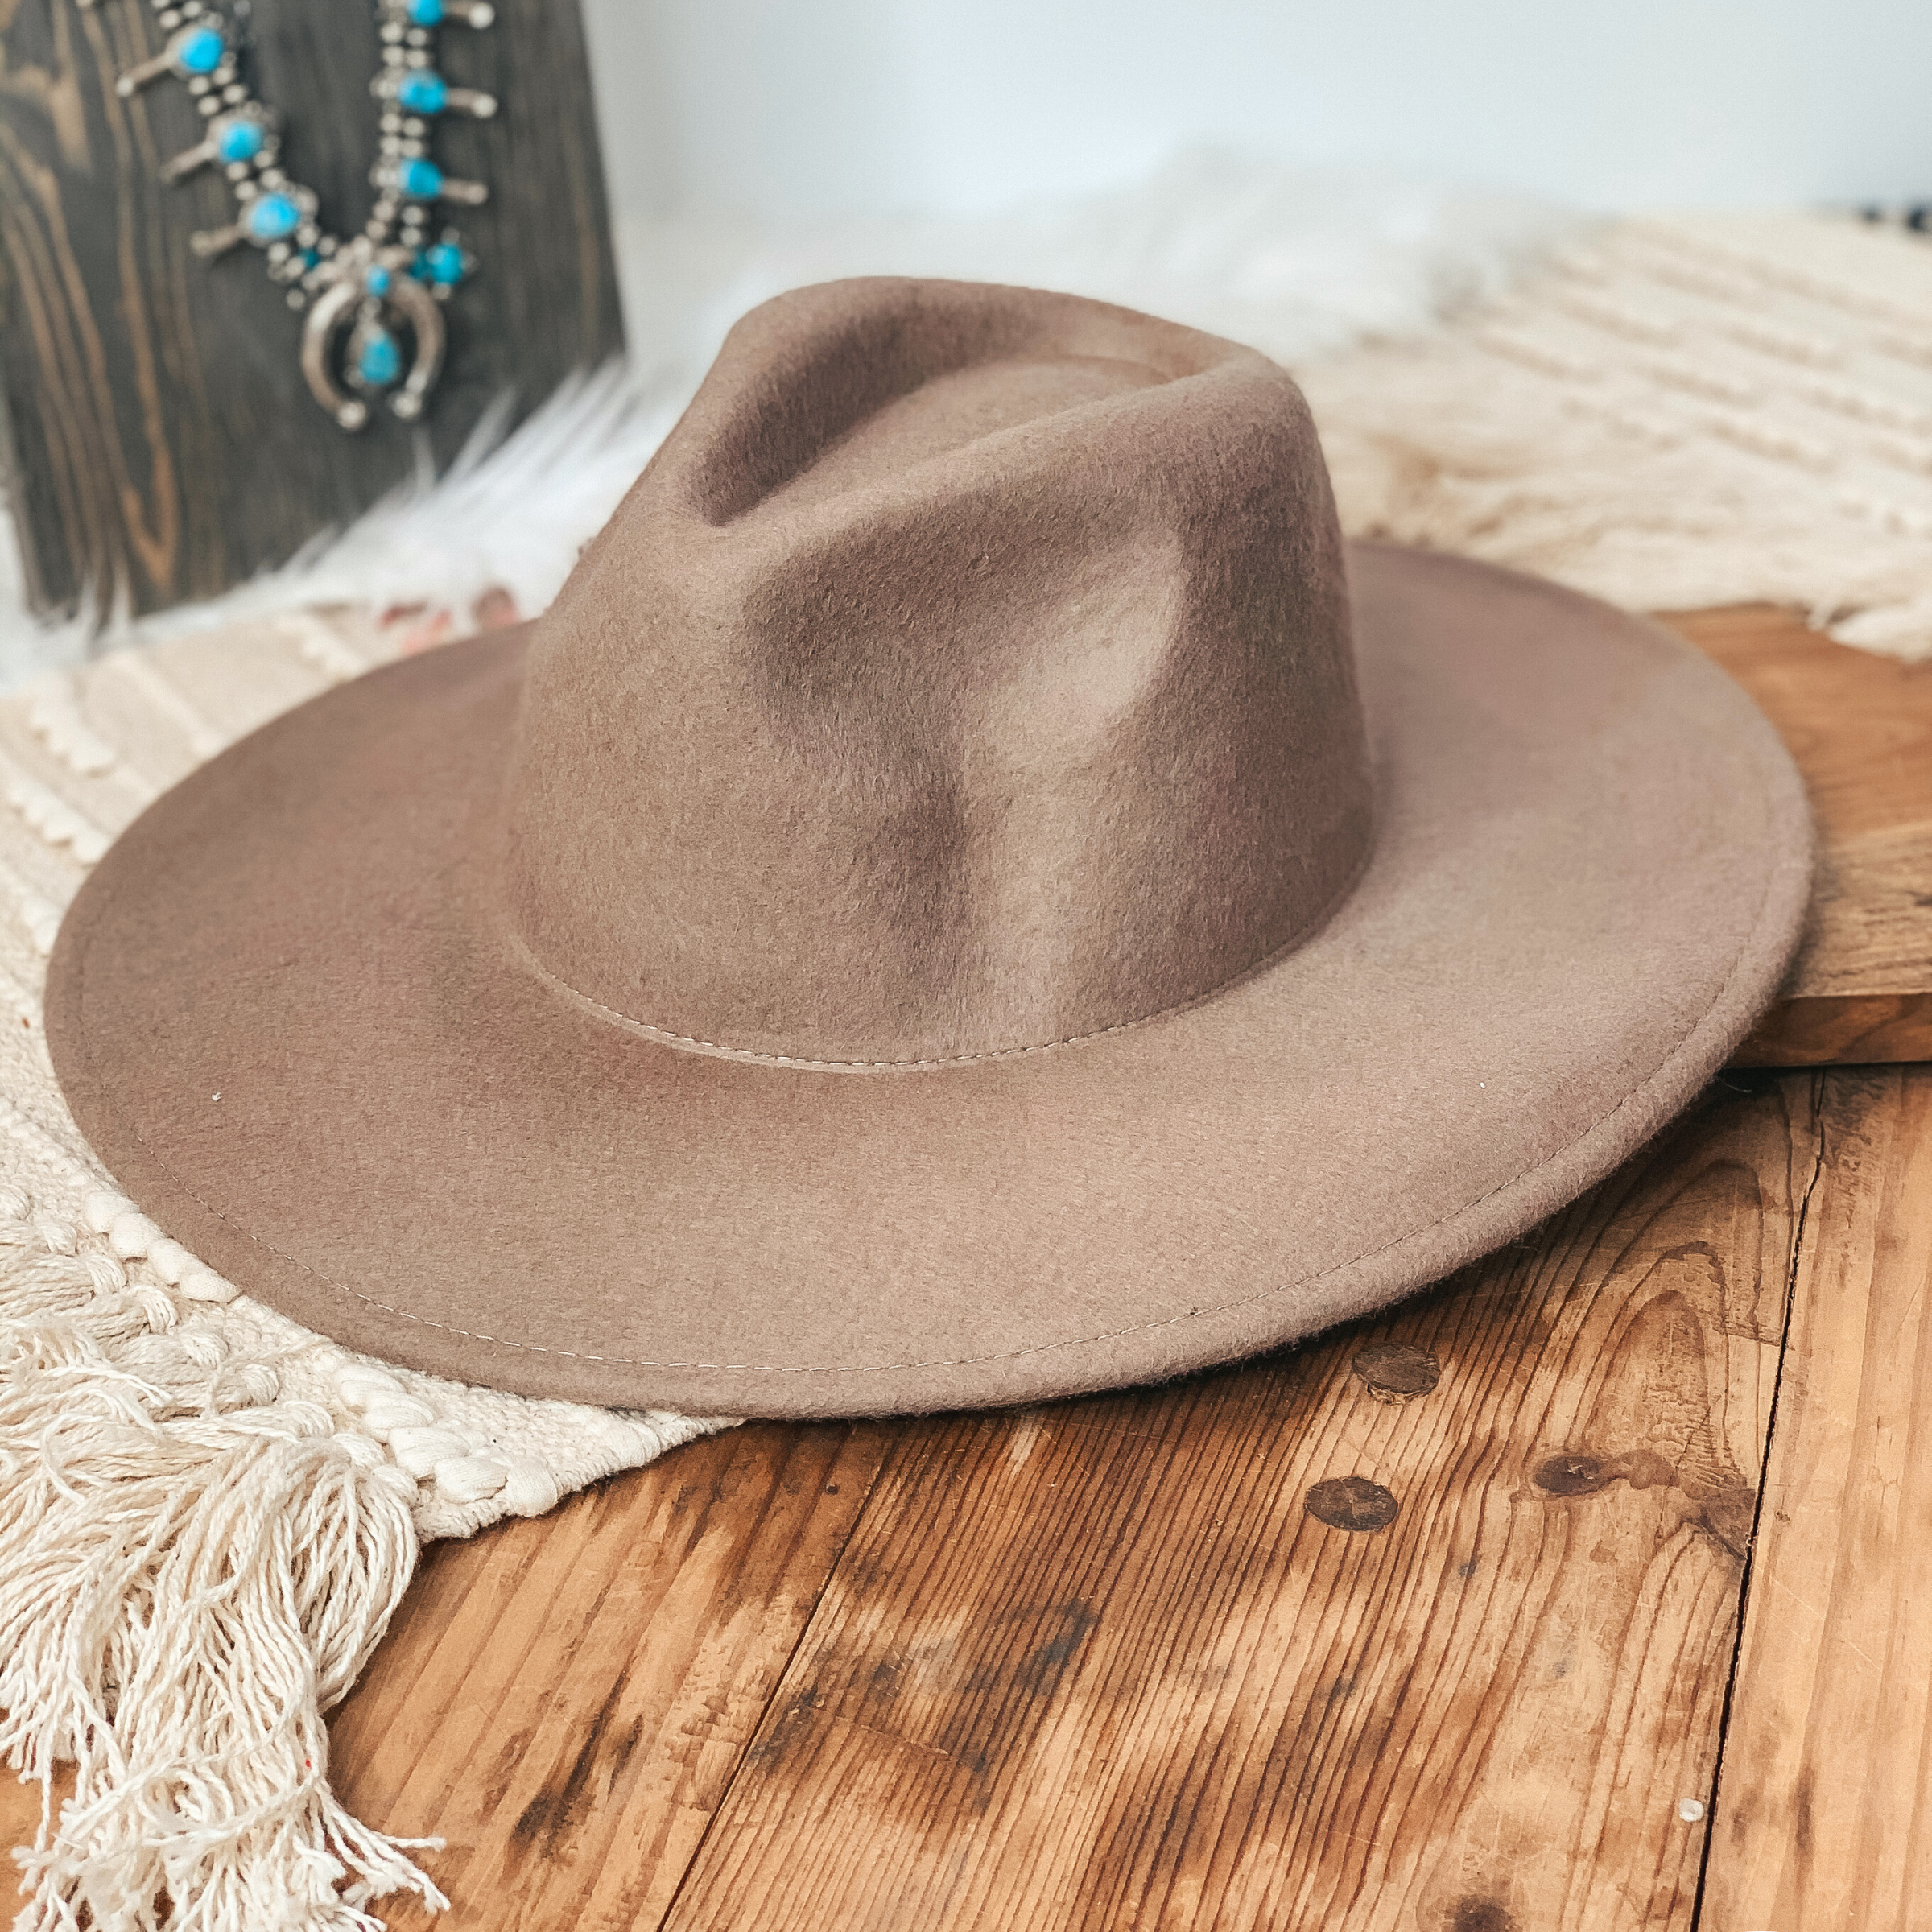 Amarillo Sky Classic Rancher Felt Hat in Khaki - Giddy Up Glamour Boutique